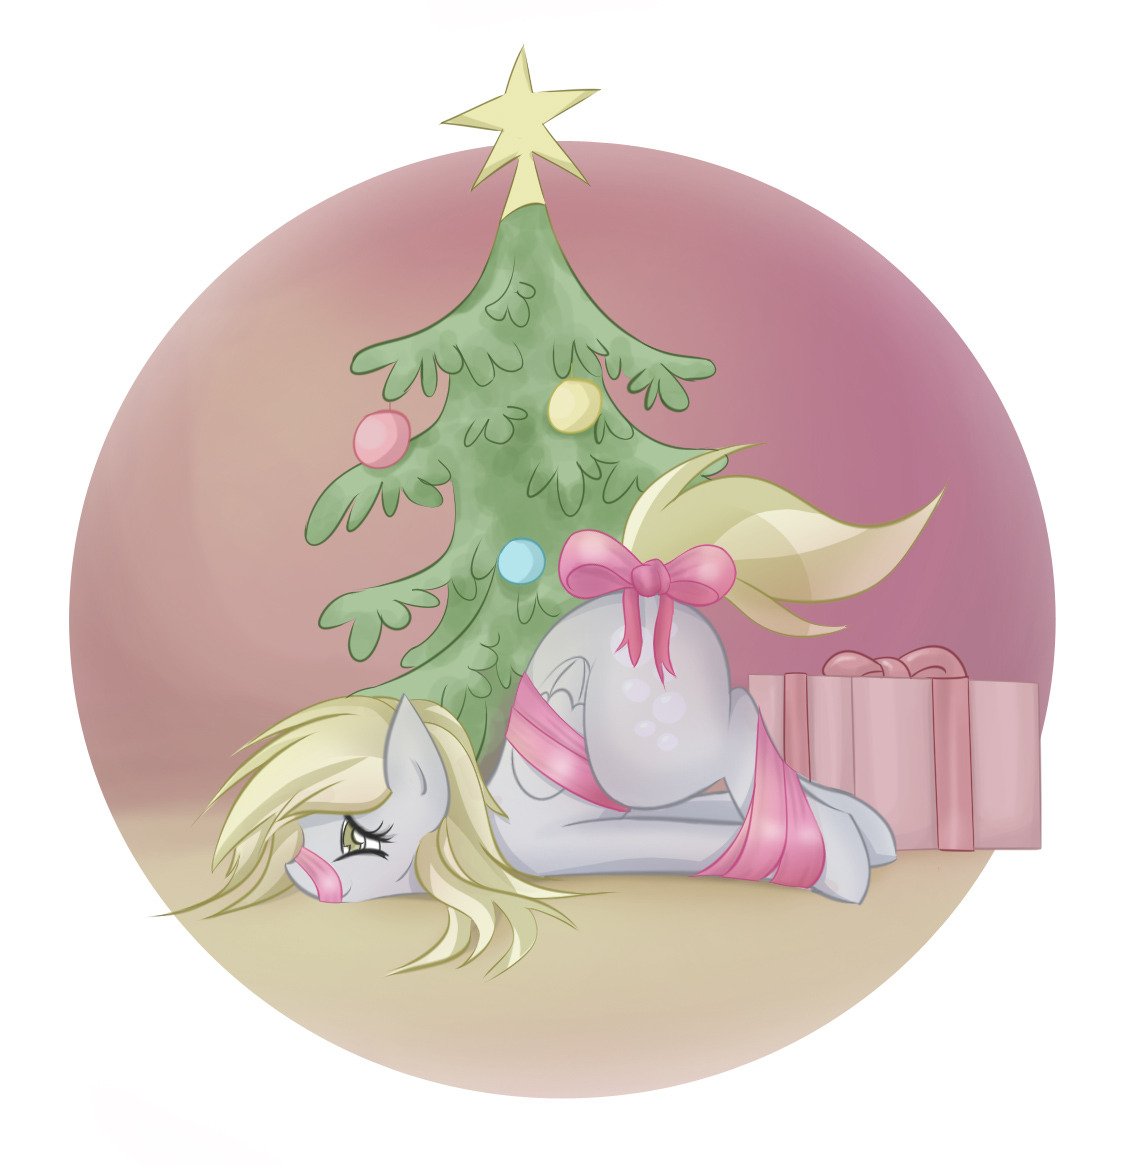 To Carrot Top, from Santa Claupse. Merry Christmas everypony &lt;3! Thank you